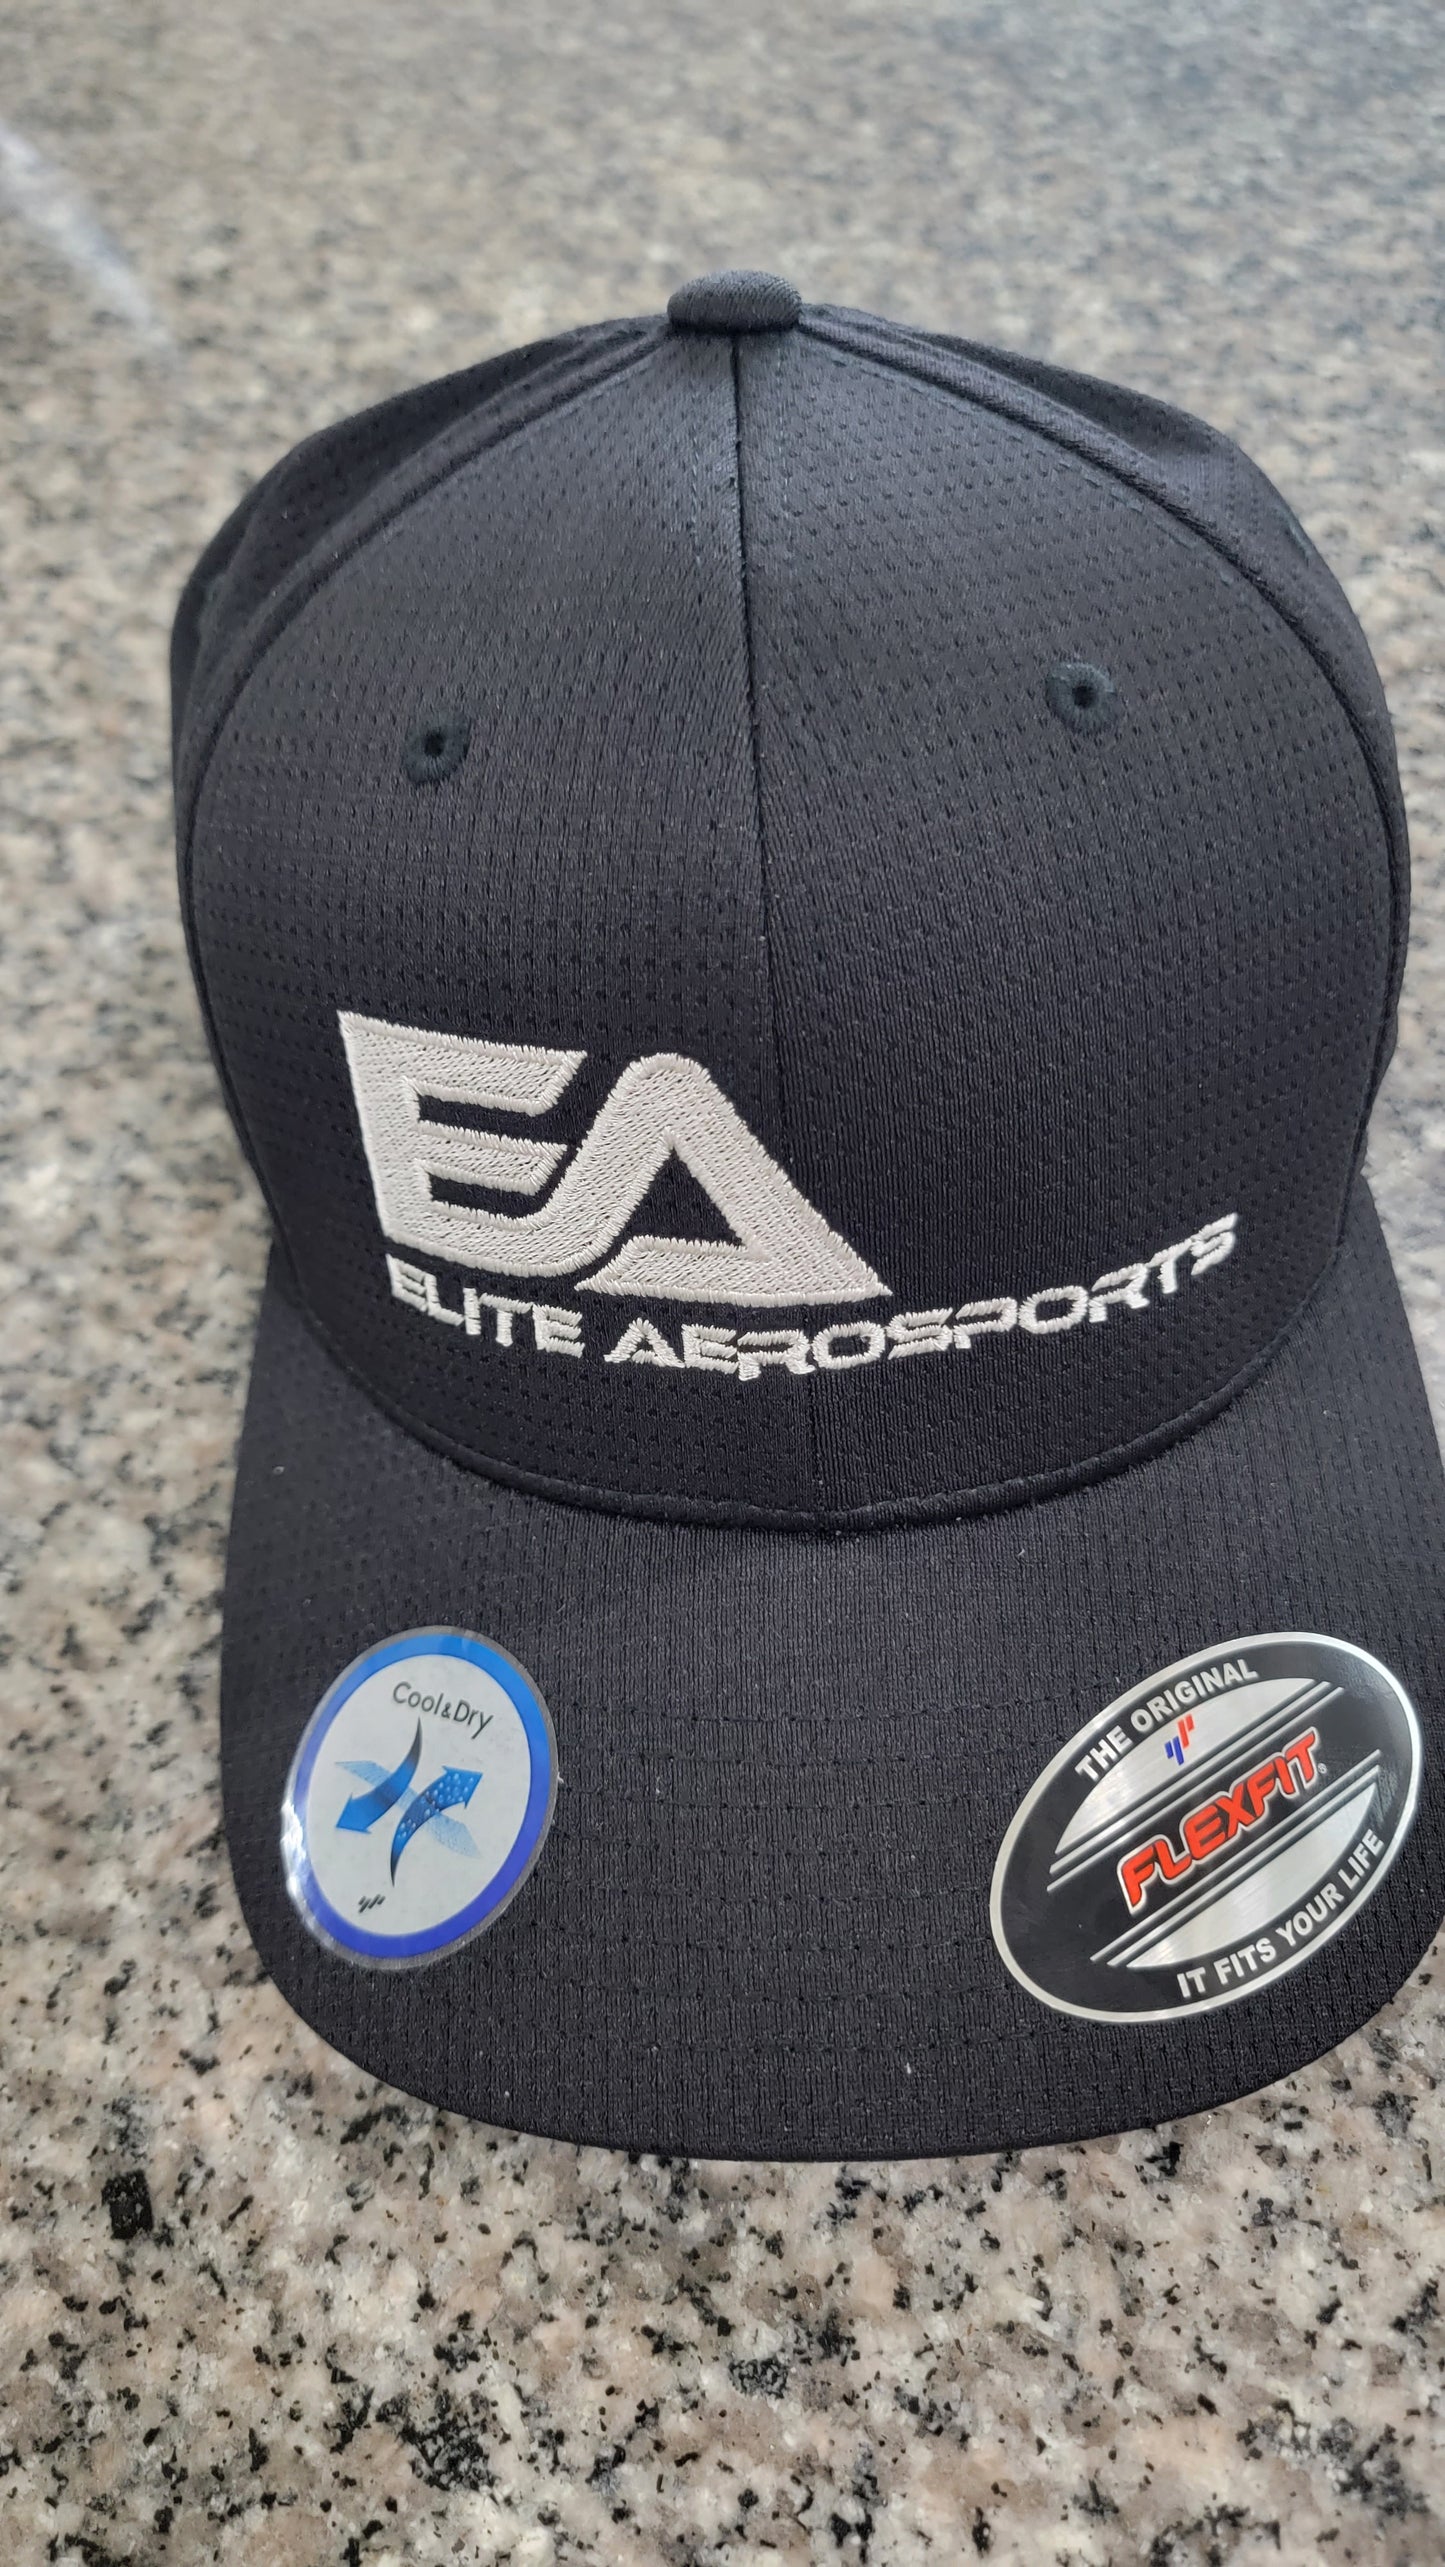 EA Cool and Dry Flexfit cap.  One size fits all.